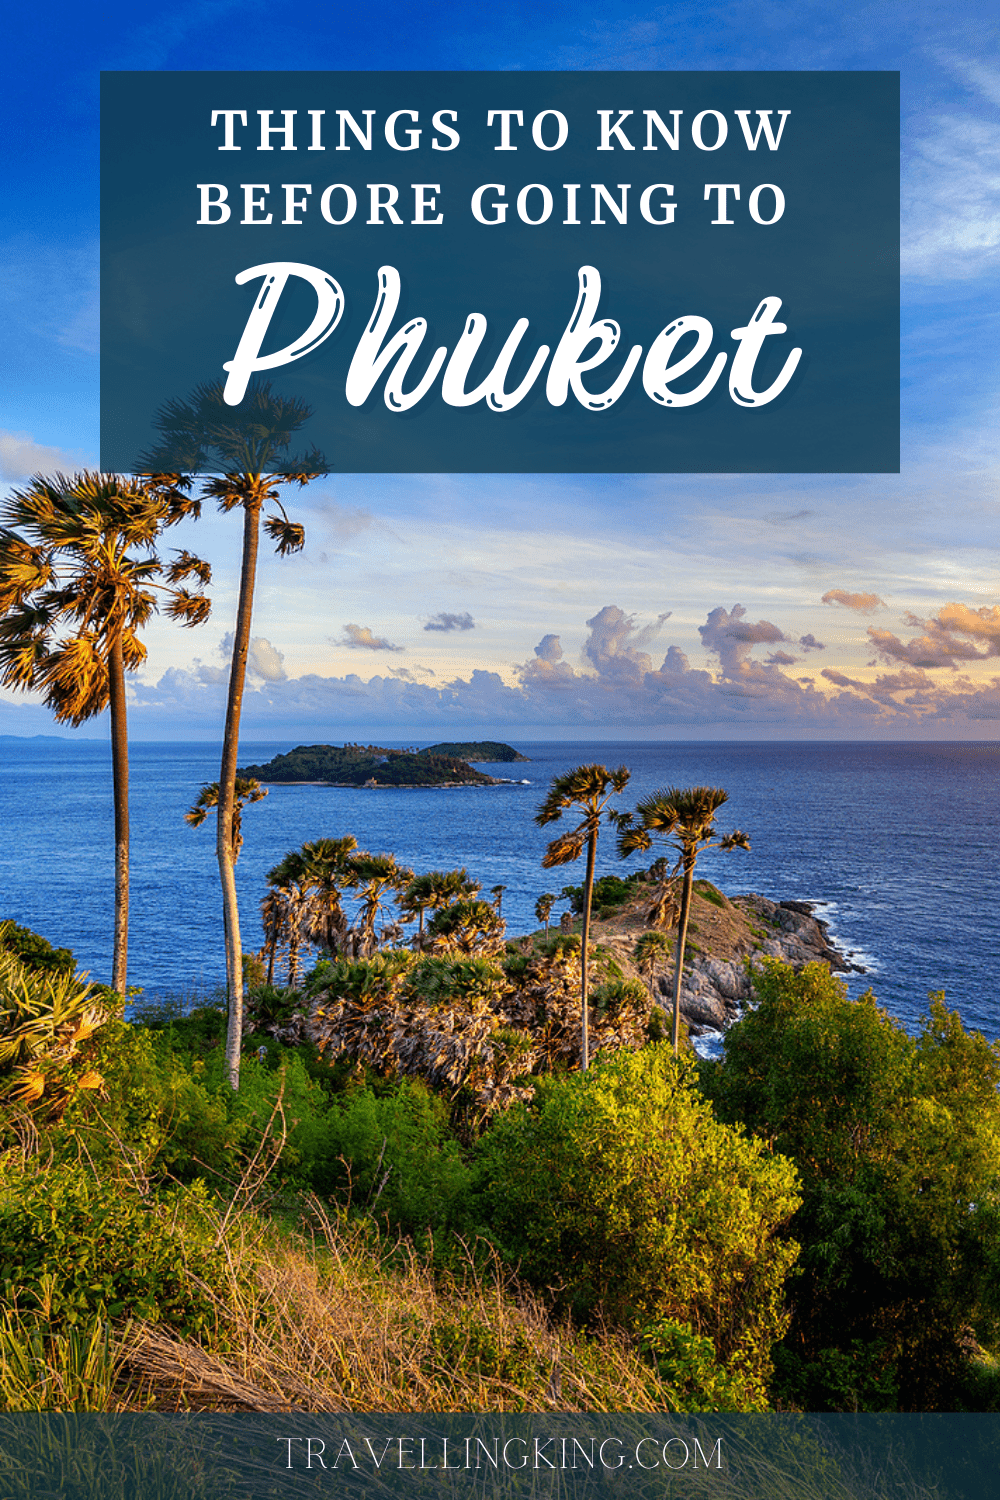 Things To Know Before Going to Phuket